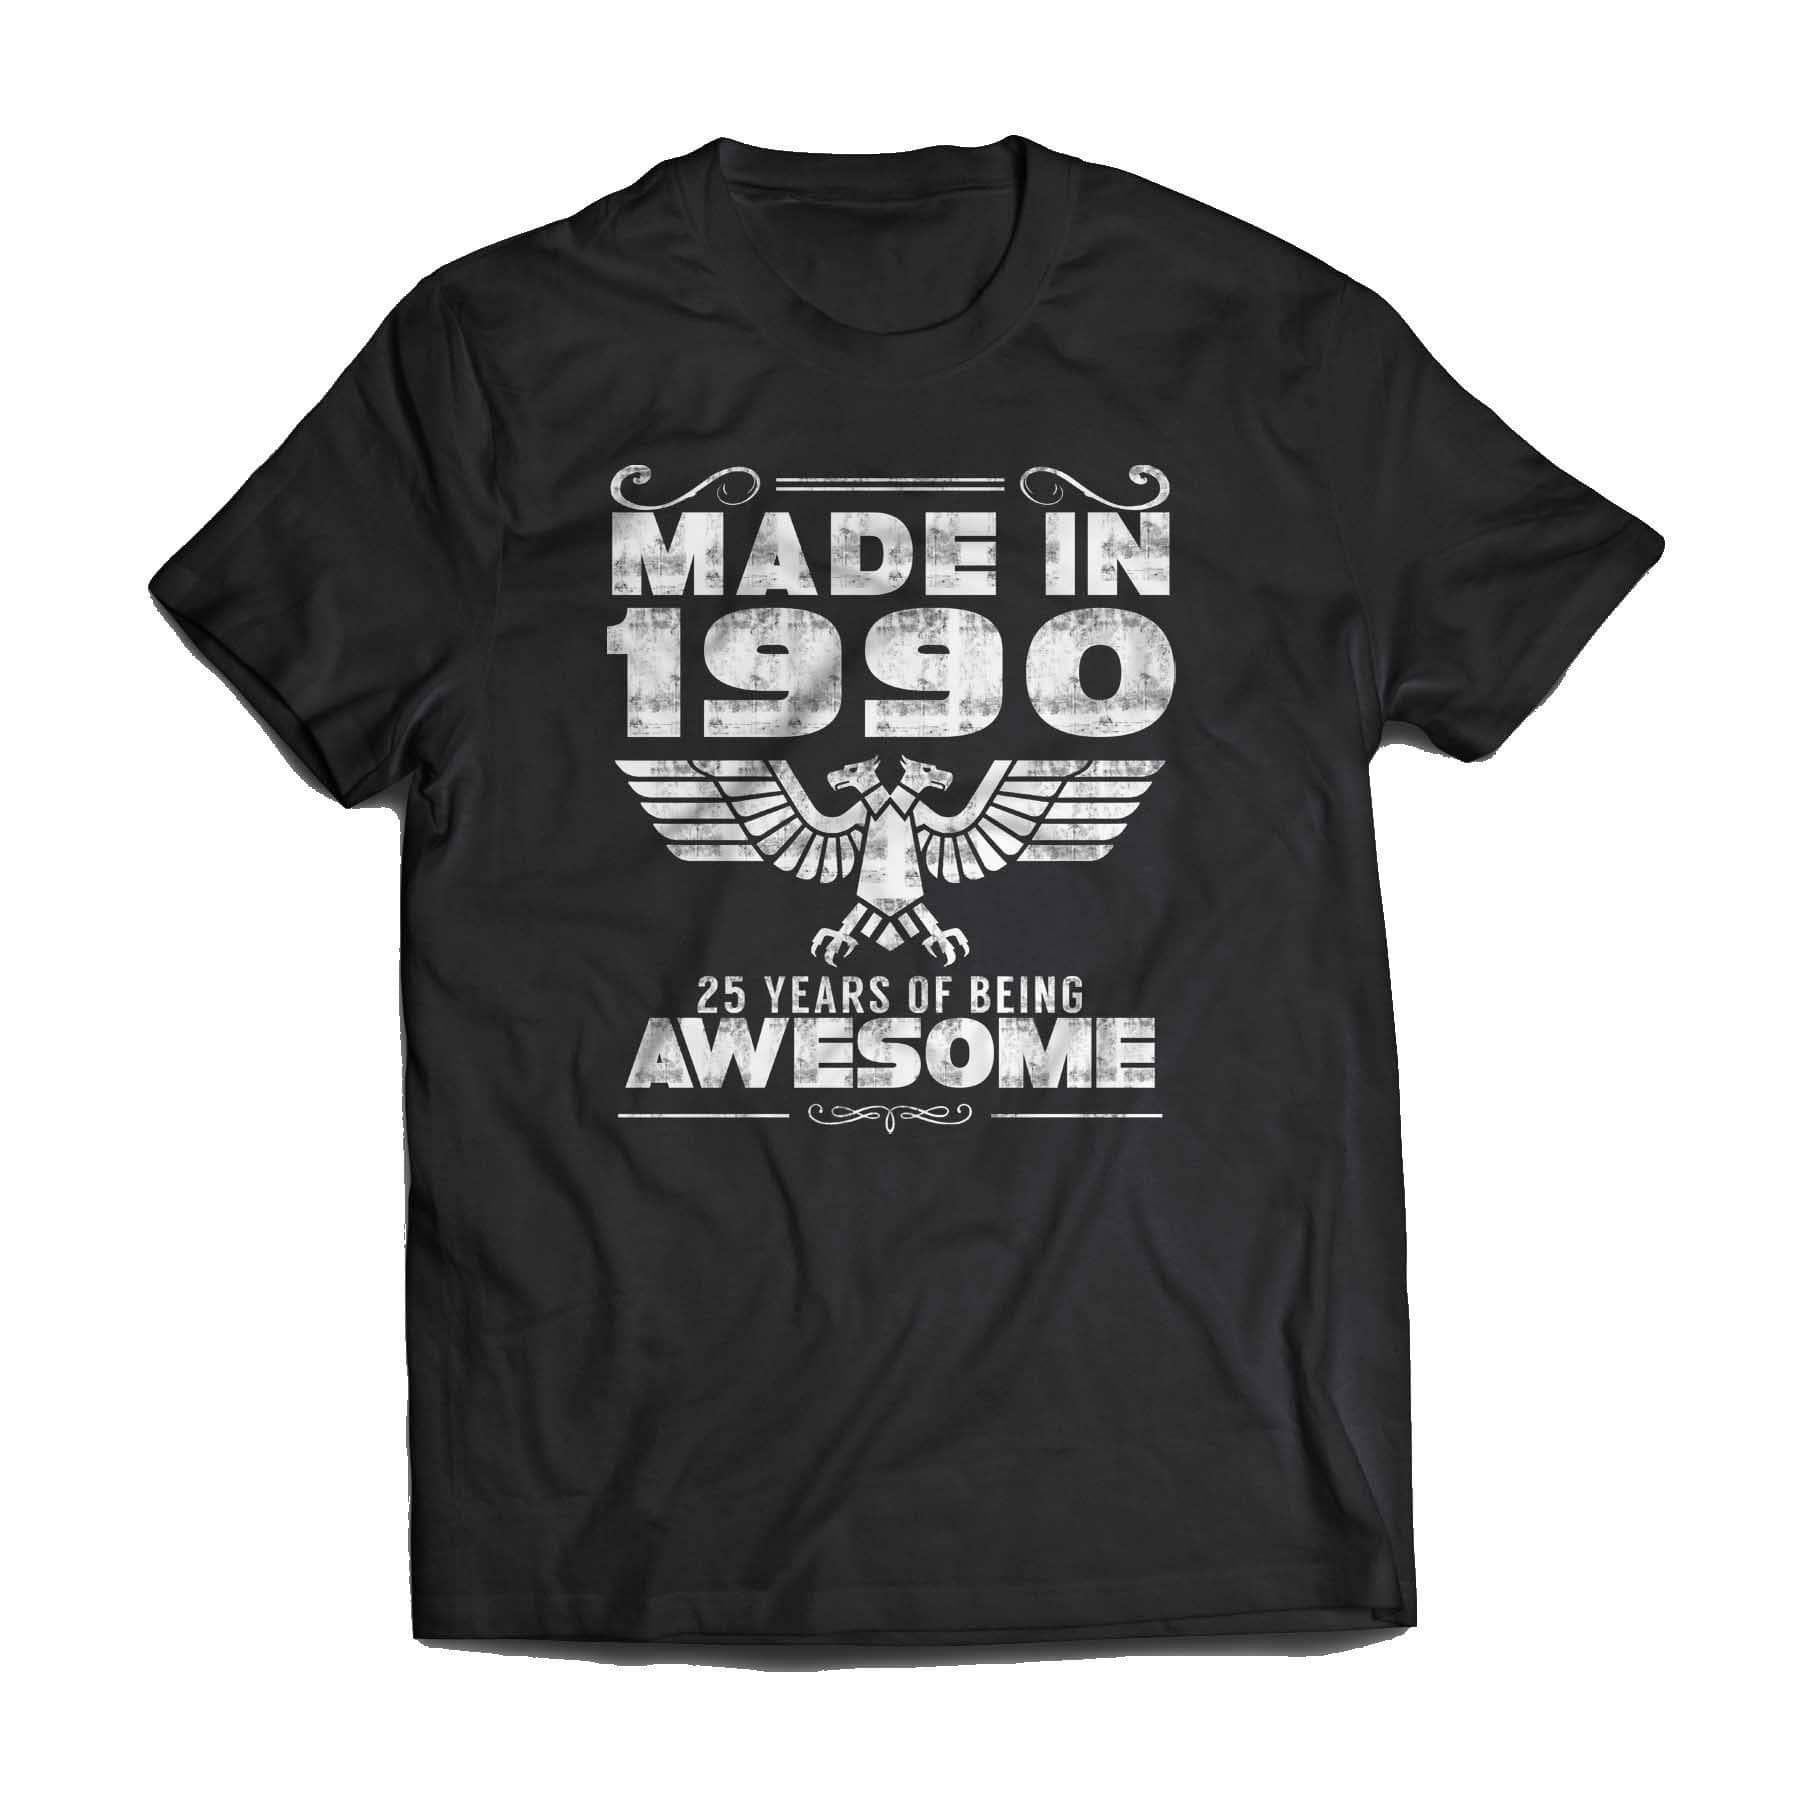 Awesome Since 1990